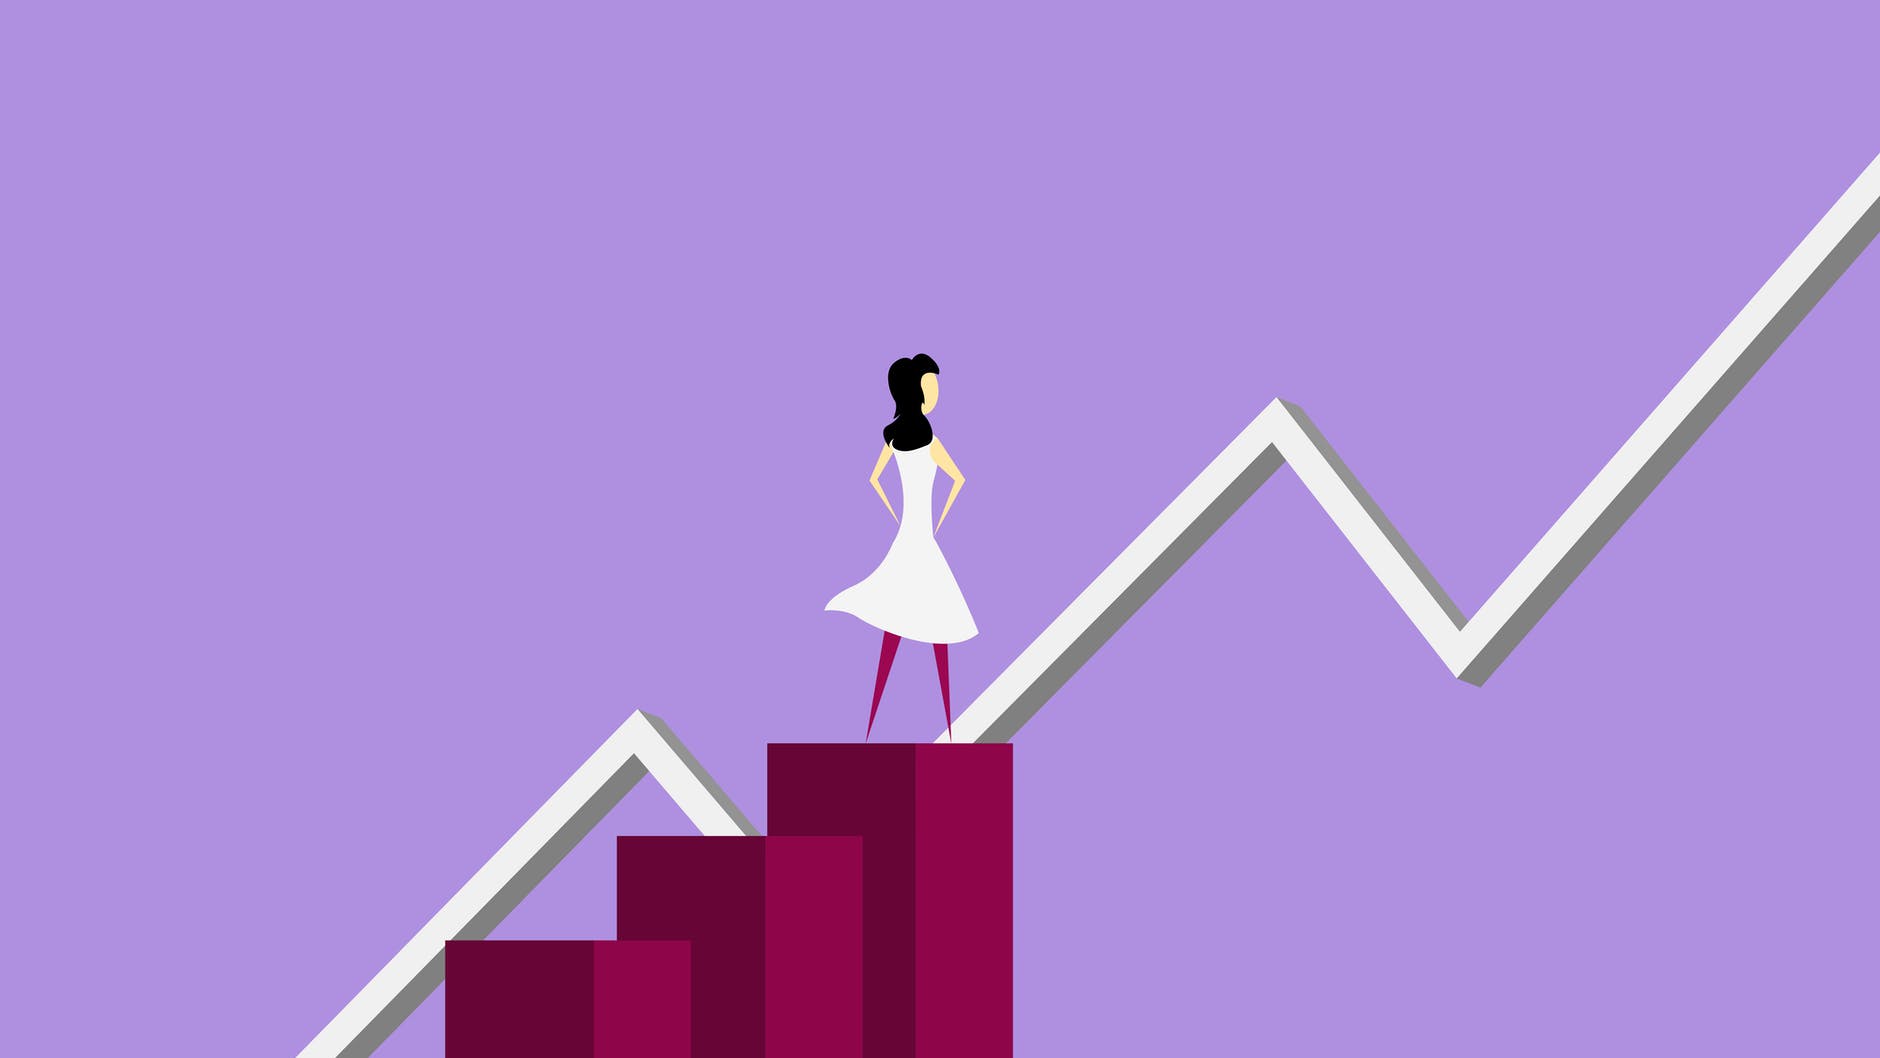 illustration of woman standing inside a chart showing increasing performance, which is what you'll see when you use your unrealised strengths more